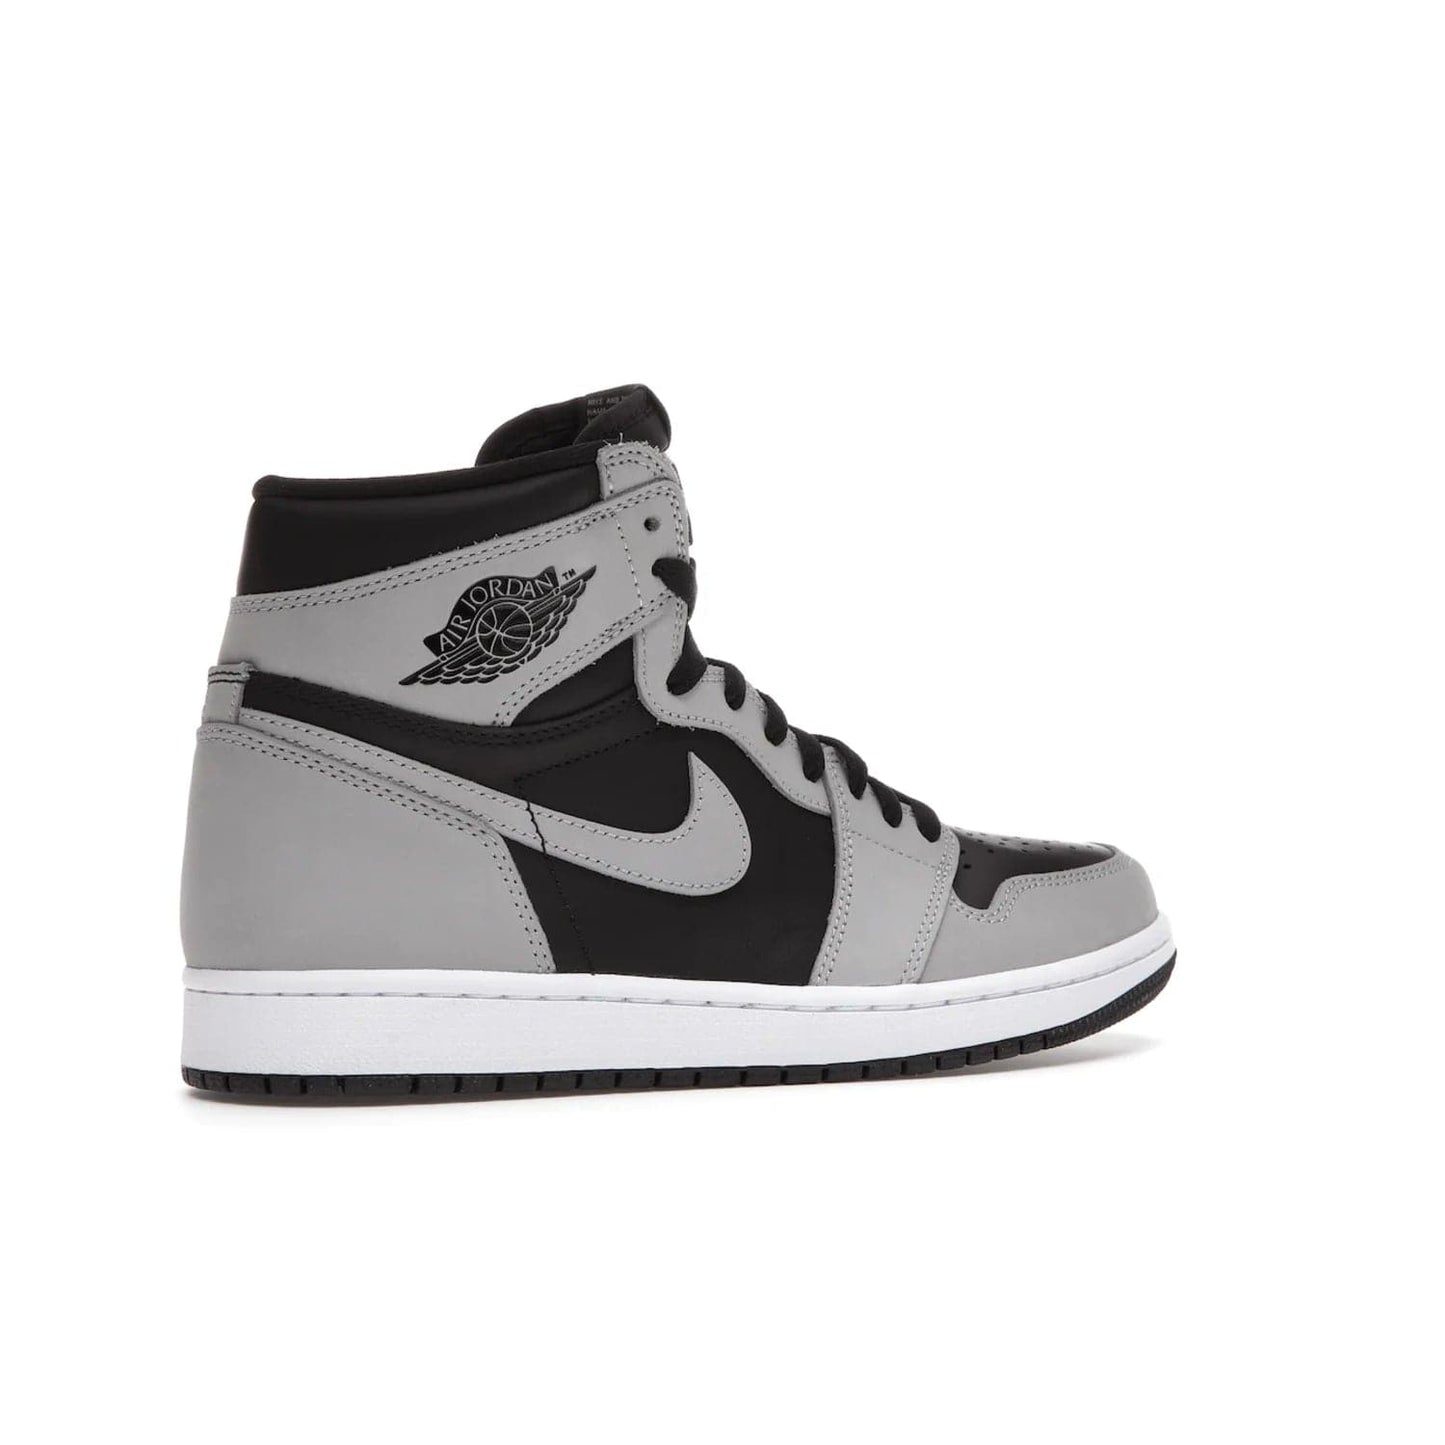 Jordan 1 Retro High Shadow 2.0 - Image 34 - Only at www.BallersClubKickz.com - #
Classic Air Jordan 1 Retro High Shadow 2.0 with black leather base and Light Smoke Grey overlays. Released in May 2021.